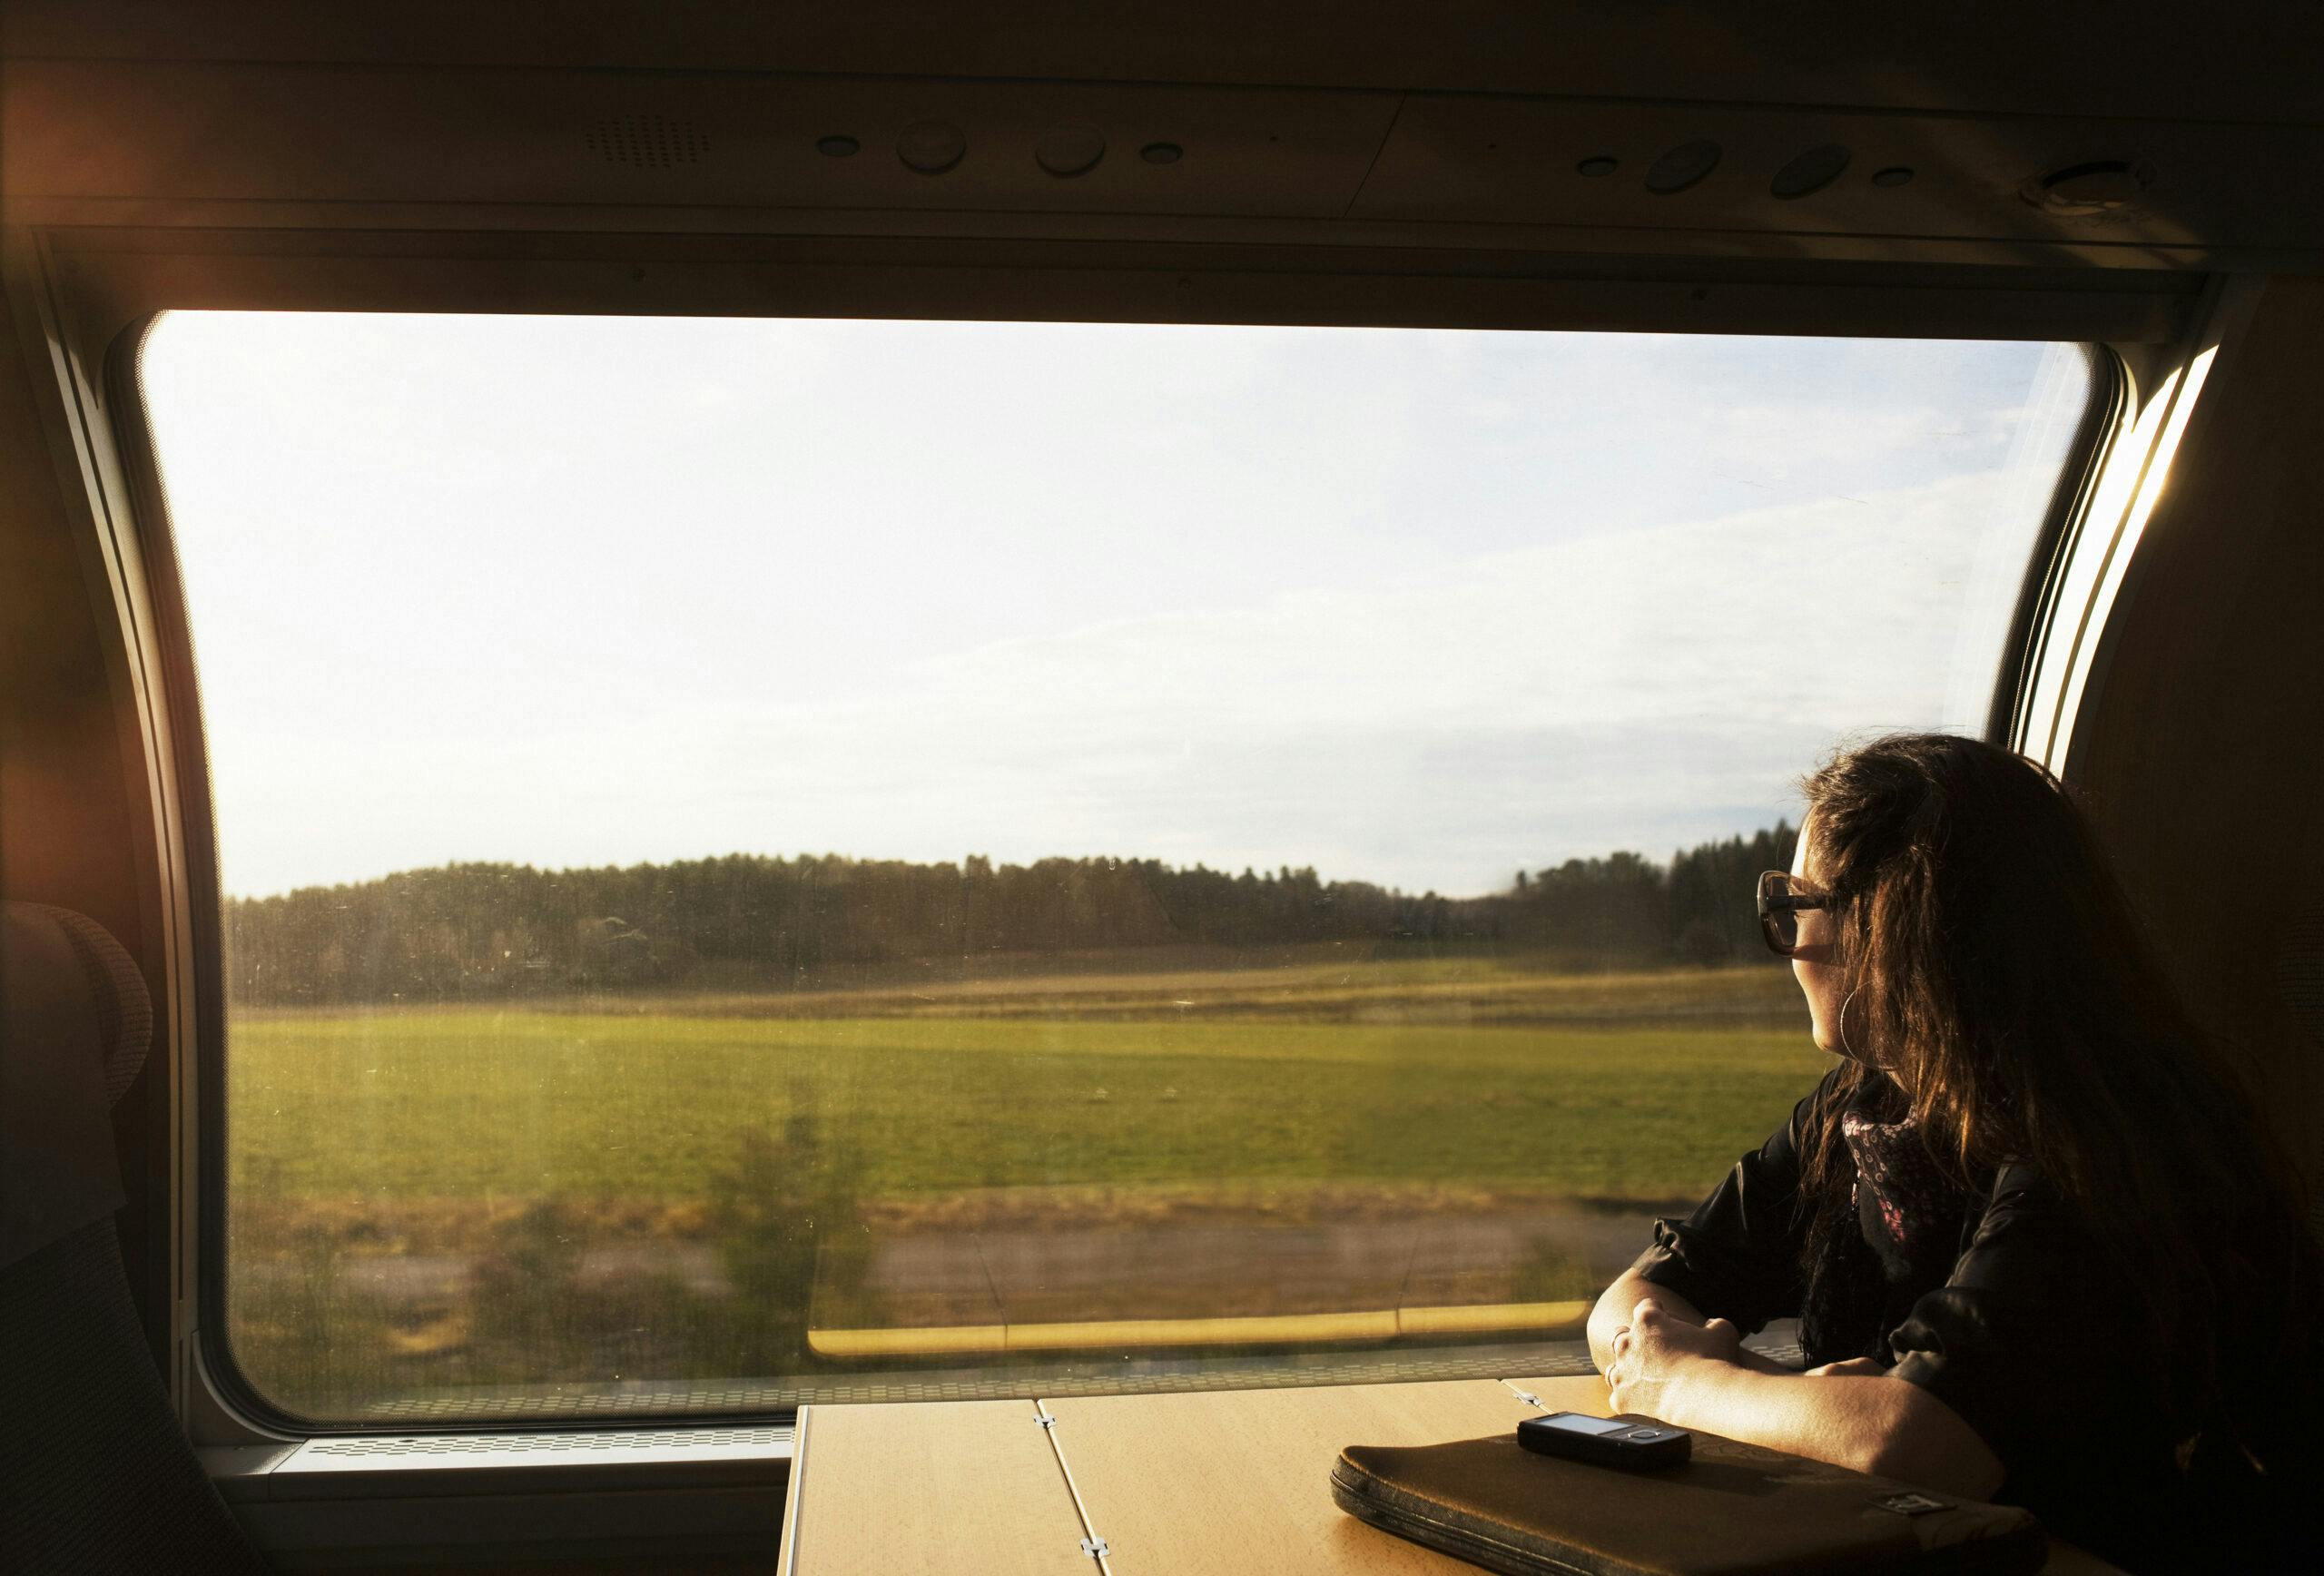 scandinavia, sweden, color image, commute, commuter, copy space, day, head and shoulders, horizontal, journey, landscape, leisure, lifestyle, look out, mid adult, one mid adult woman only, one person only, passenger, photography, relaxing, ride, side view, train, vehicle interior, window, tågfönster, tåg, tågresa, resa, kvinna på tåg,